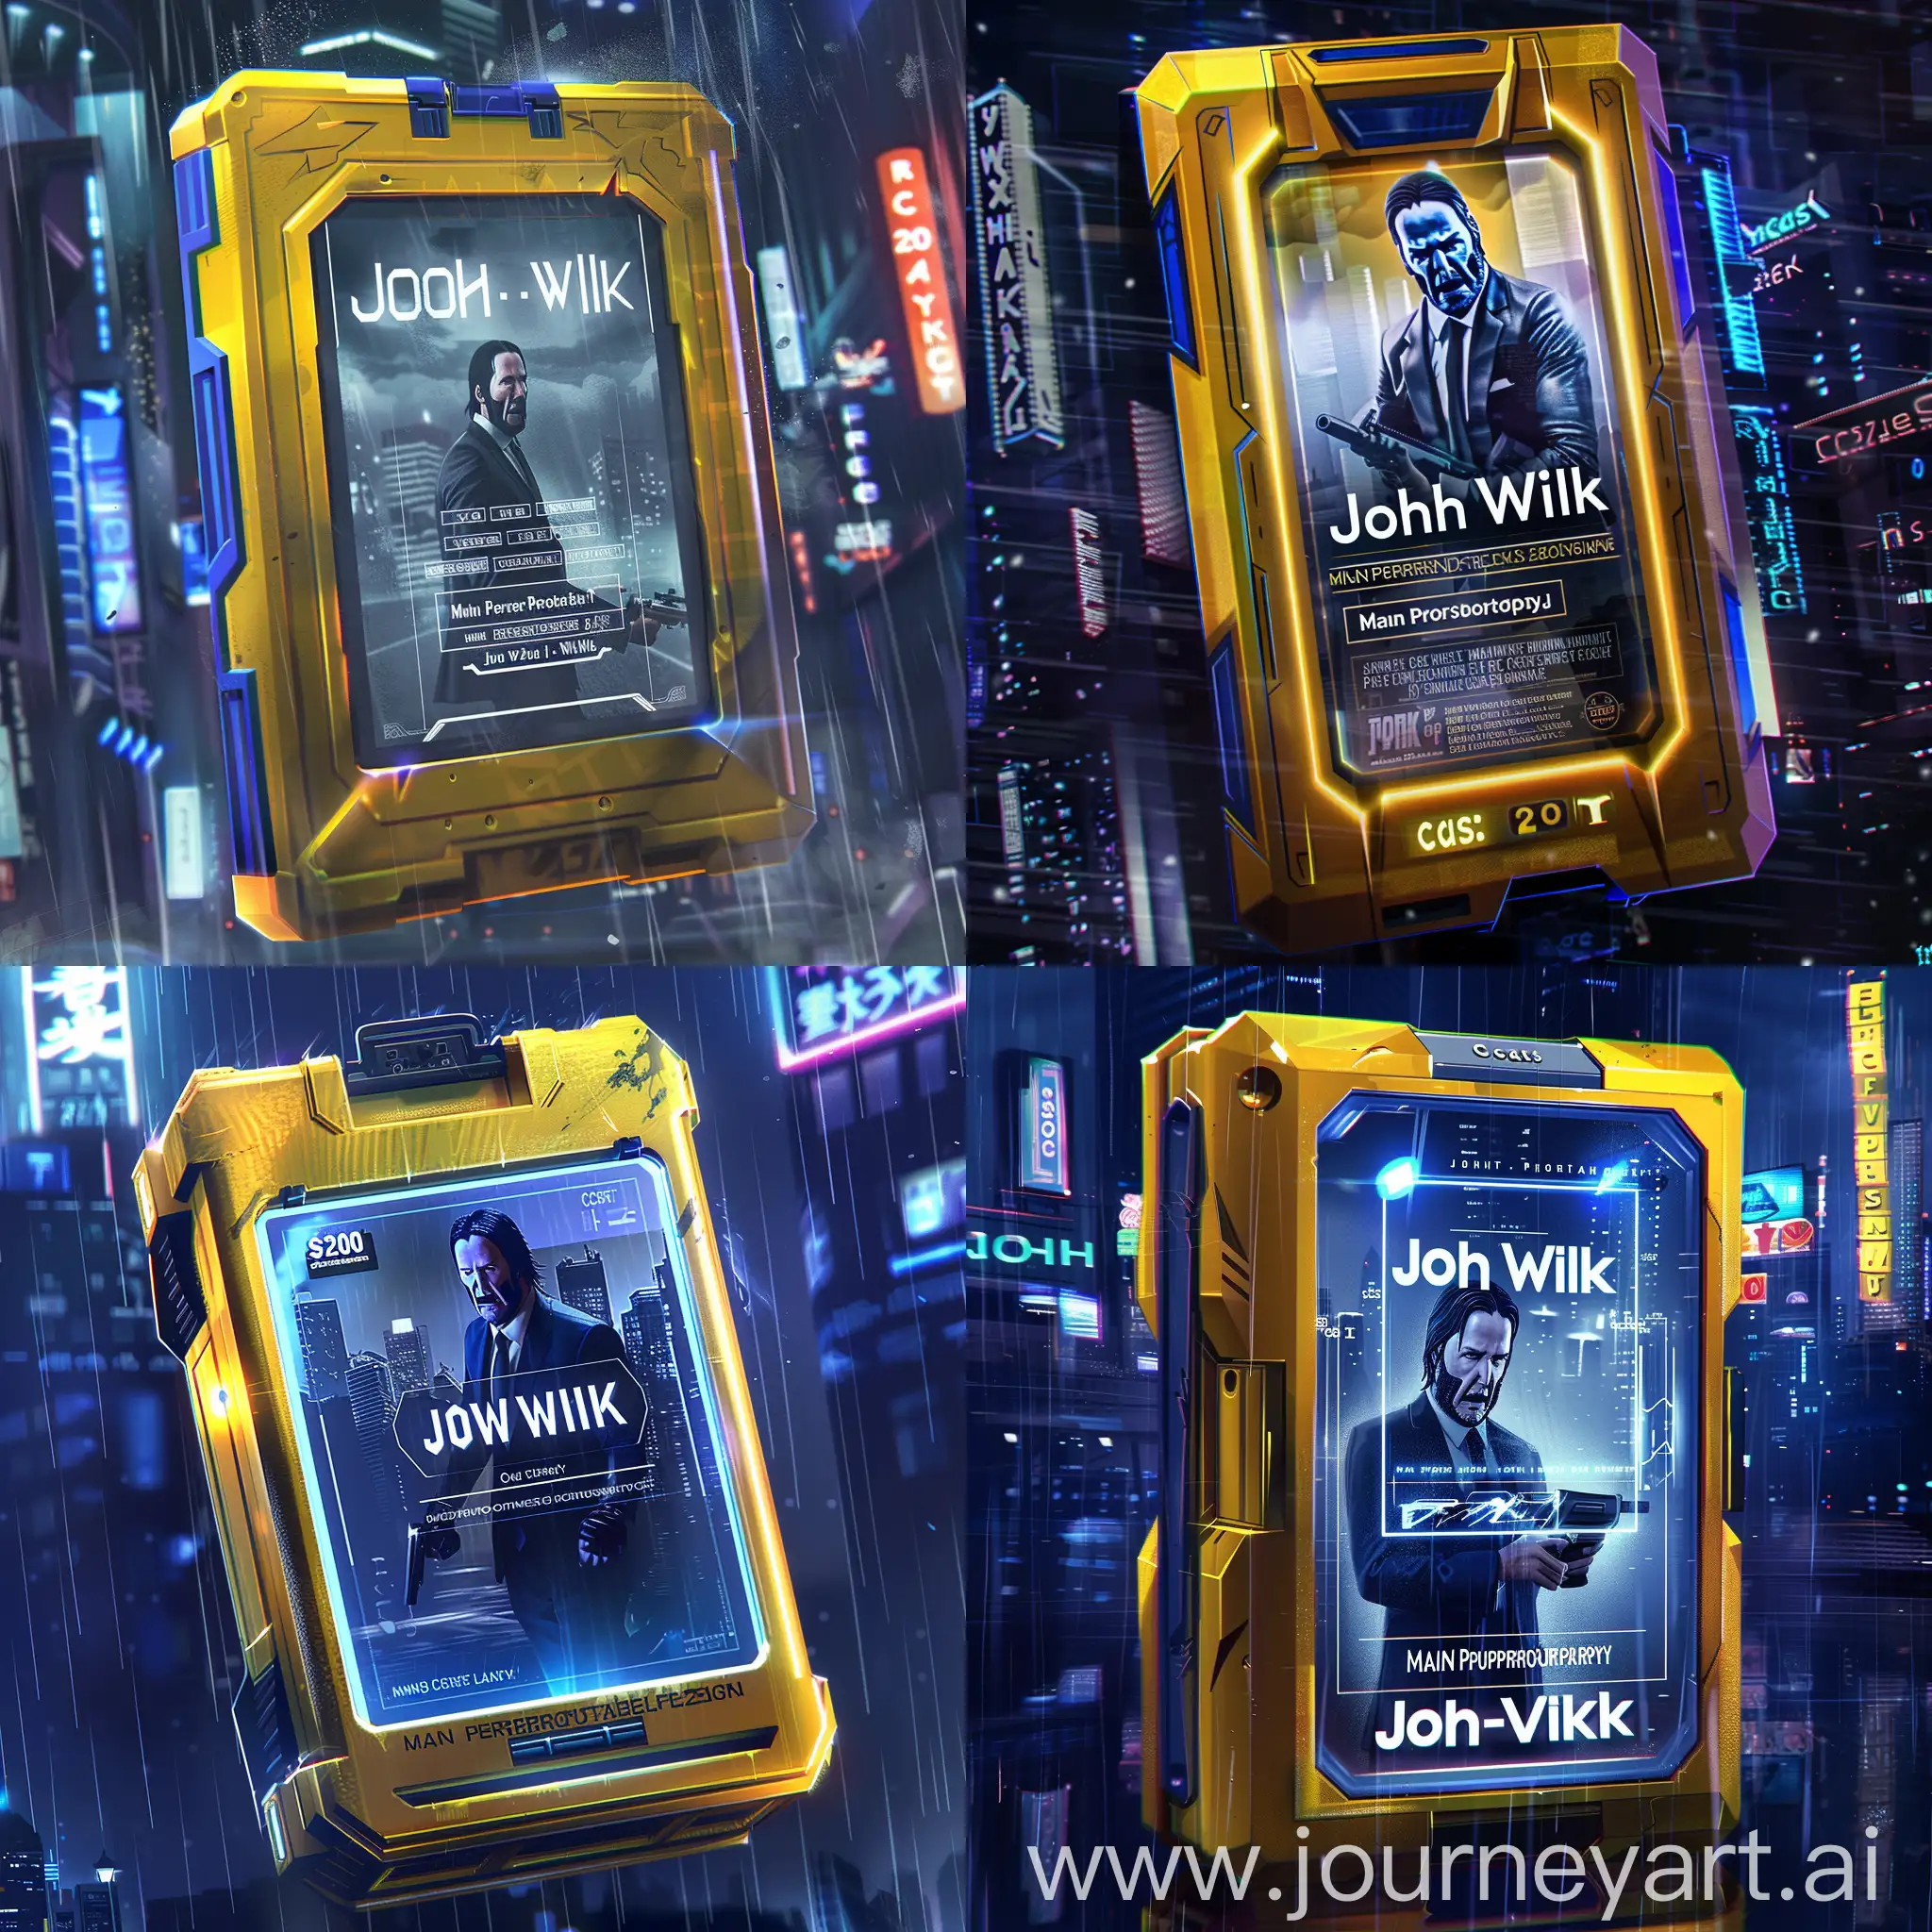 Generate a stunning cyberpunk-style case with a holographic display, showcasing the main character, John Wick. The case is sleek, metallic, with neon blue and purple accents. It has a digital price tag showing "Cost: 250р" and a prominent label "Main Prize: Personal Profession 'John Wick'". The background is a futuristic cityscape with towering skyscrapers, neon signs, and a dark, rainy atmosphere. John Wick is depicted in his signature black suit, holding a high-tech weapon, with an intense and determined expression.